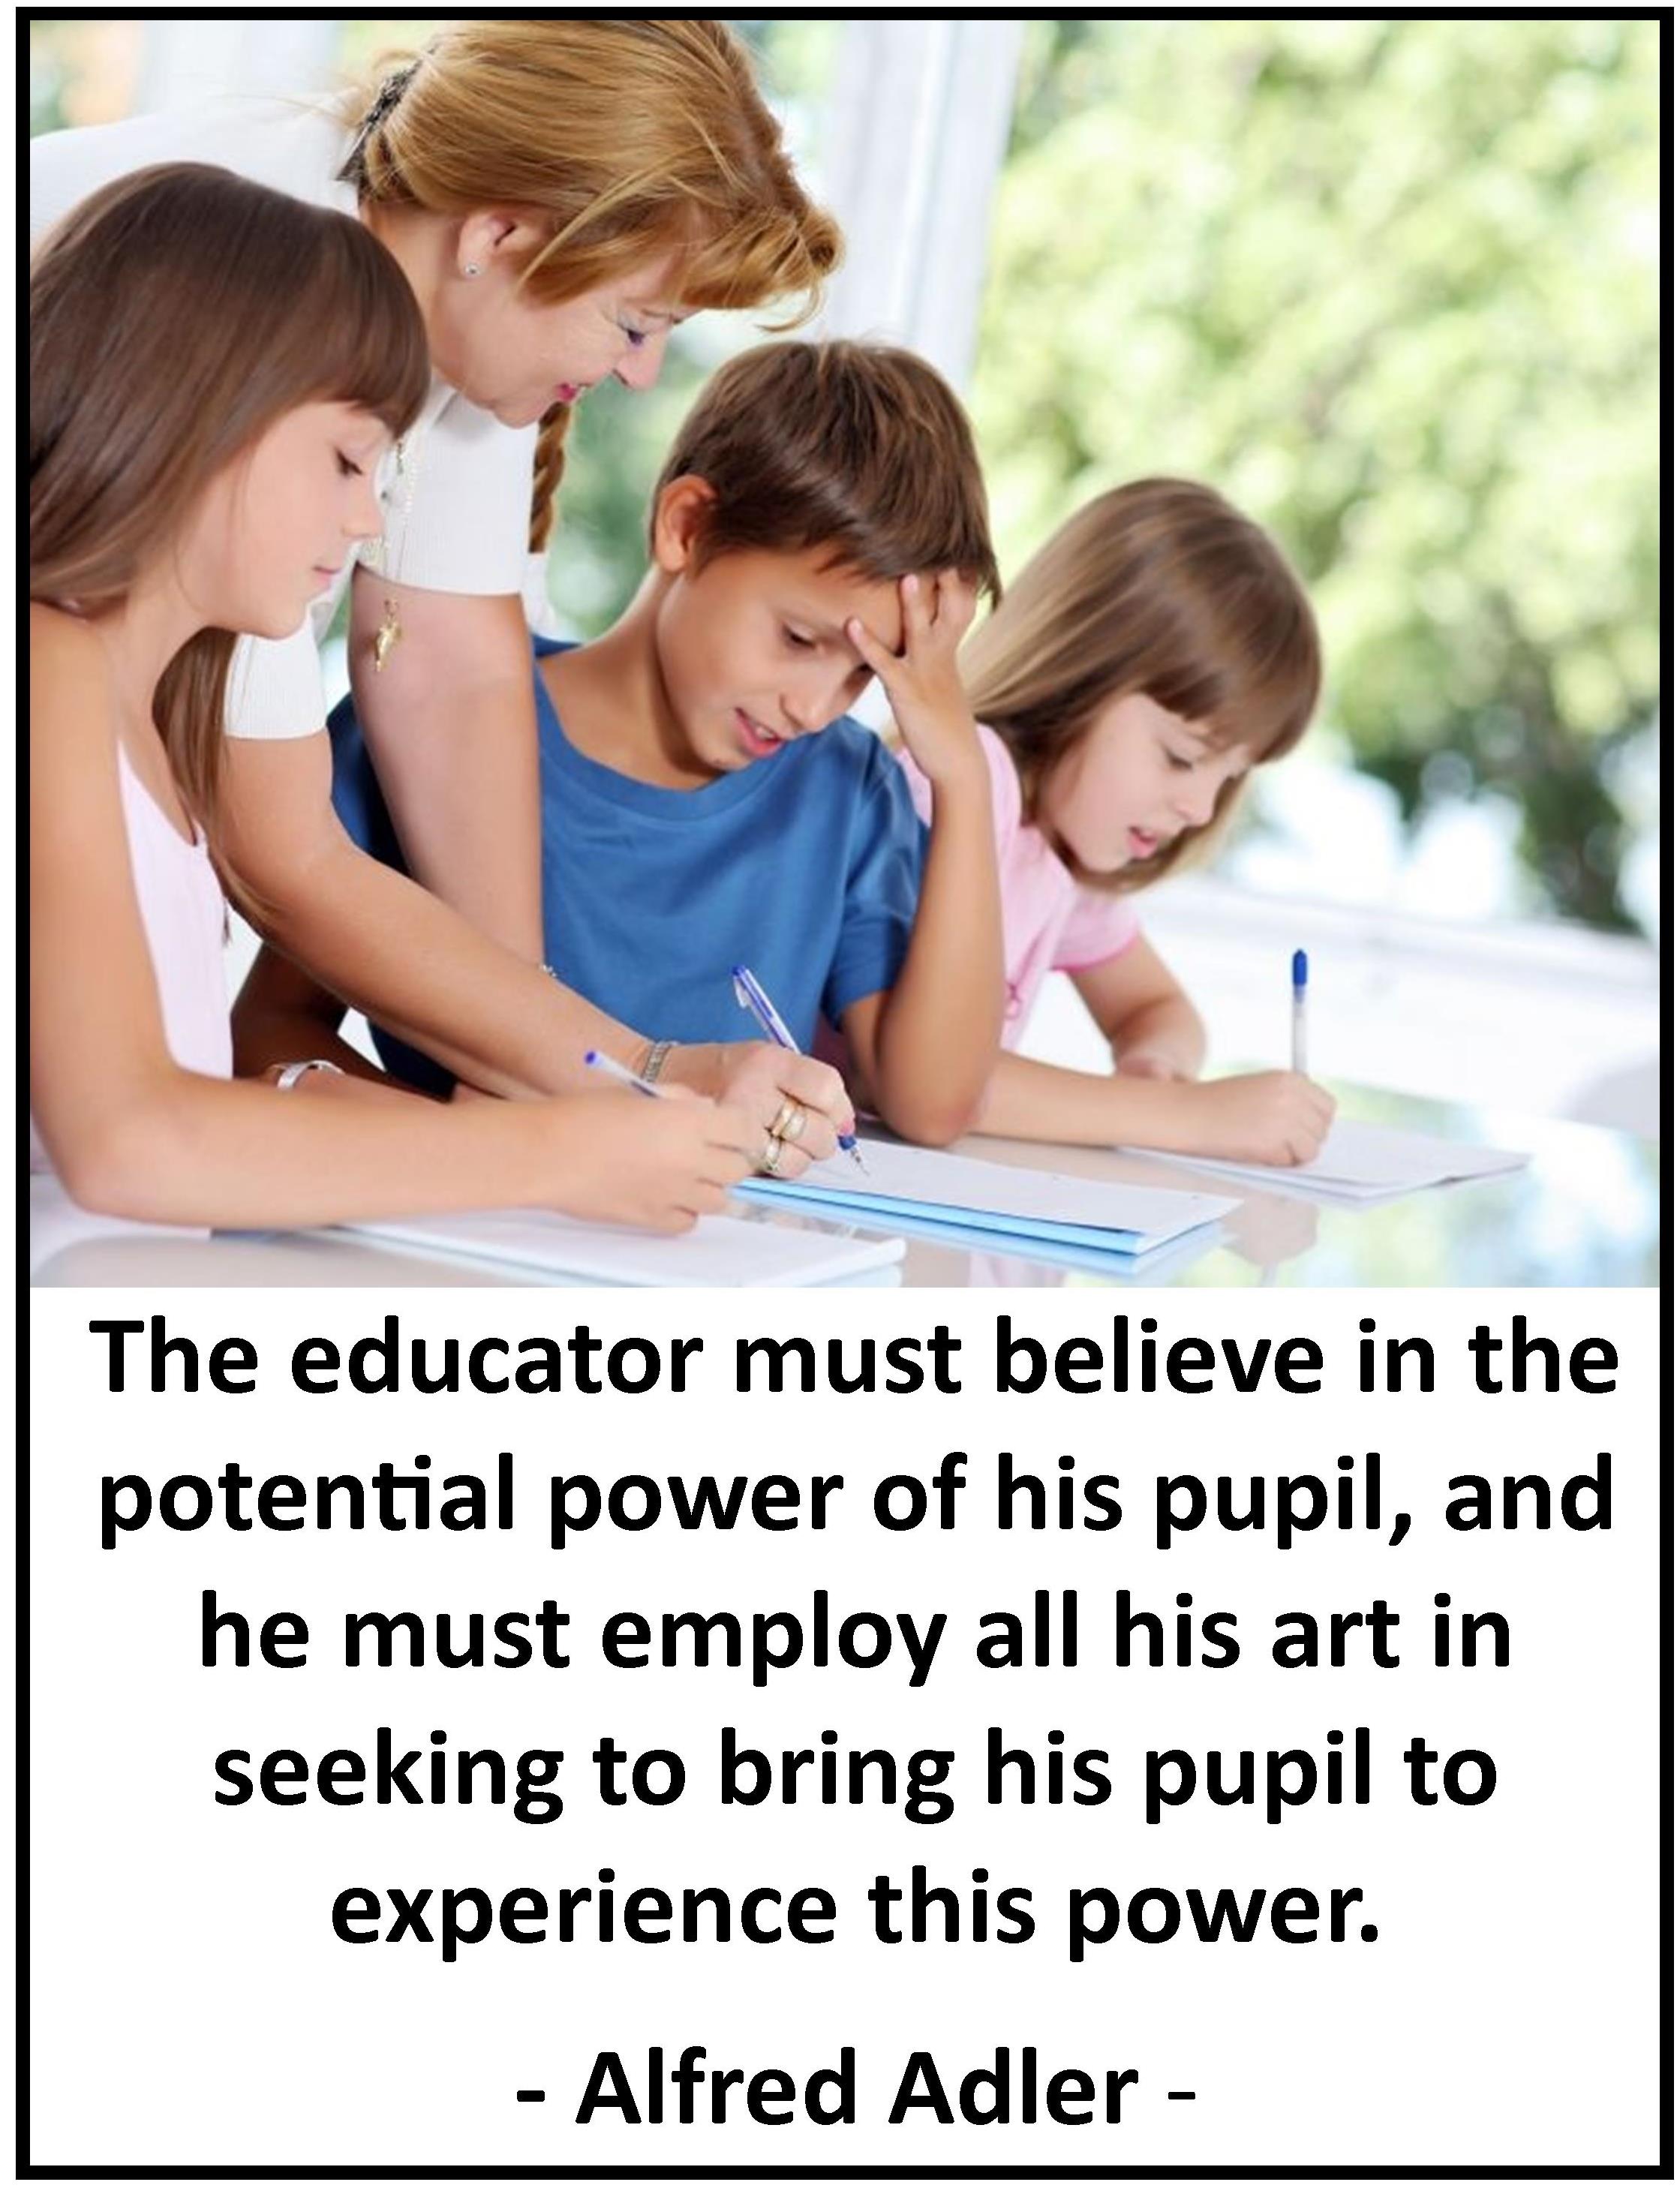 Alfred Adler quote on Education and Teachers